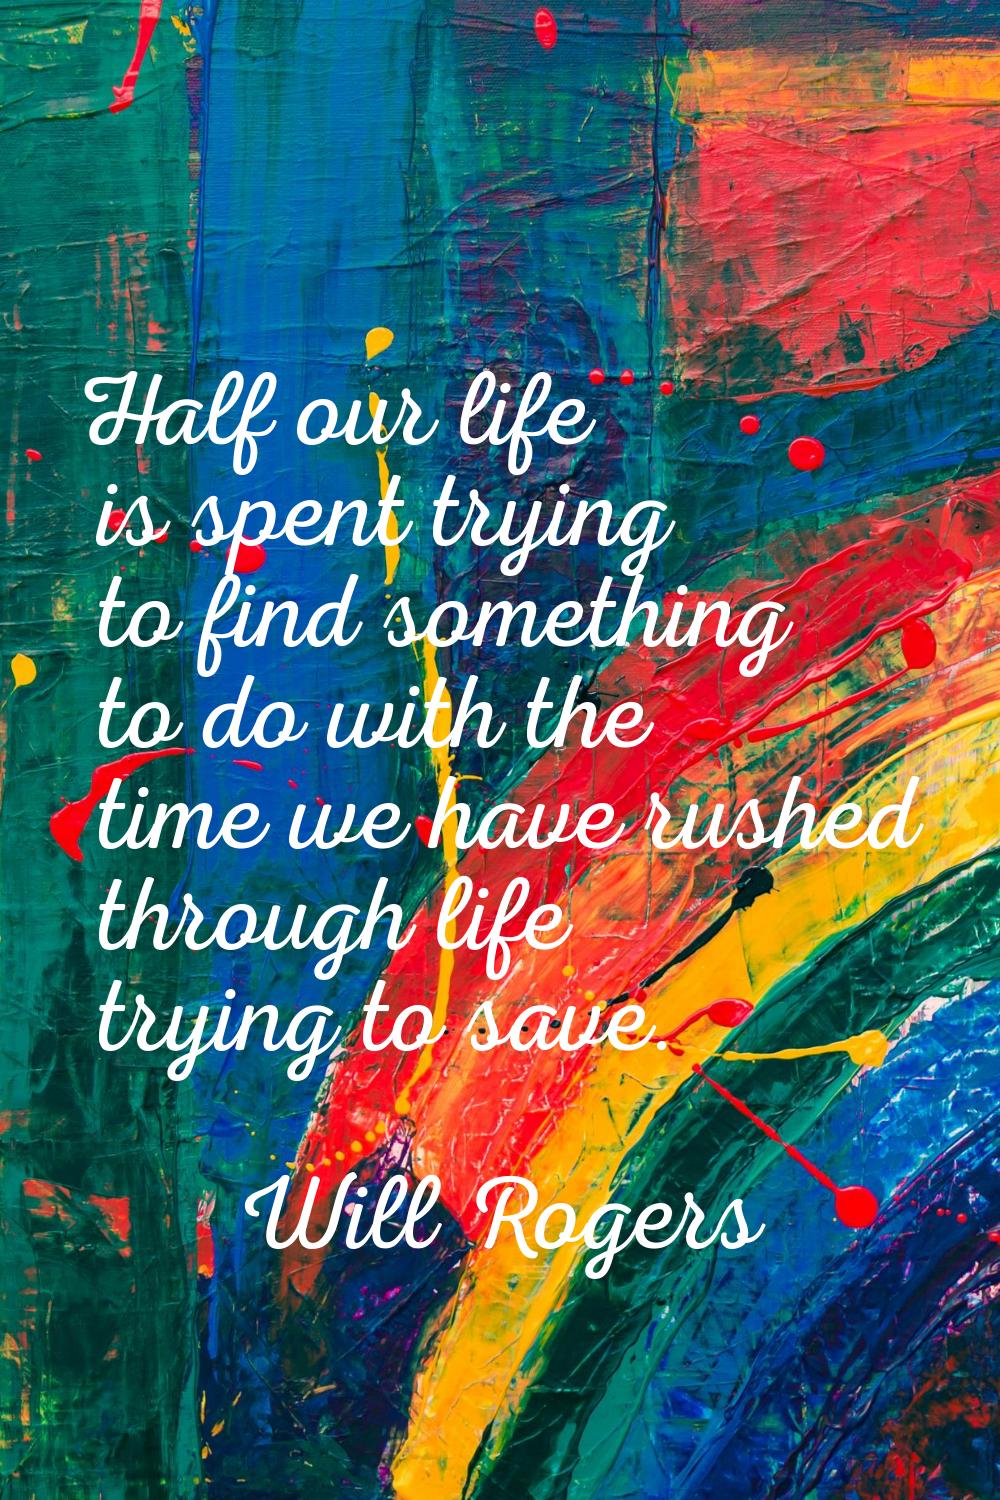 Half our life is spent trying to find something to do with the time we have rushed through life try